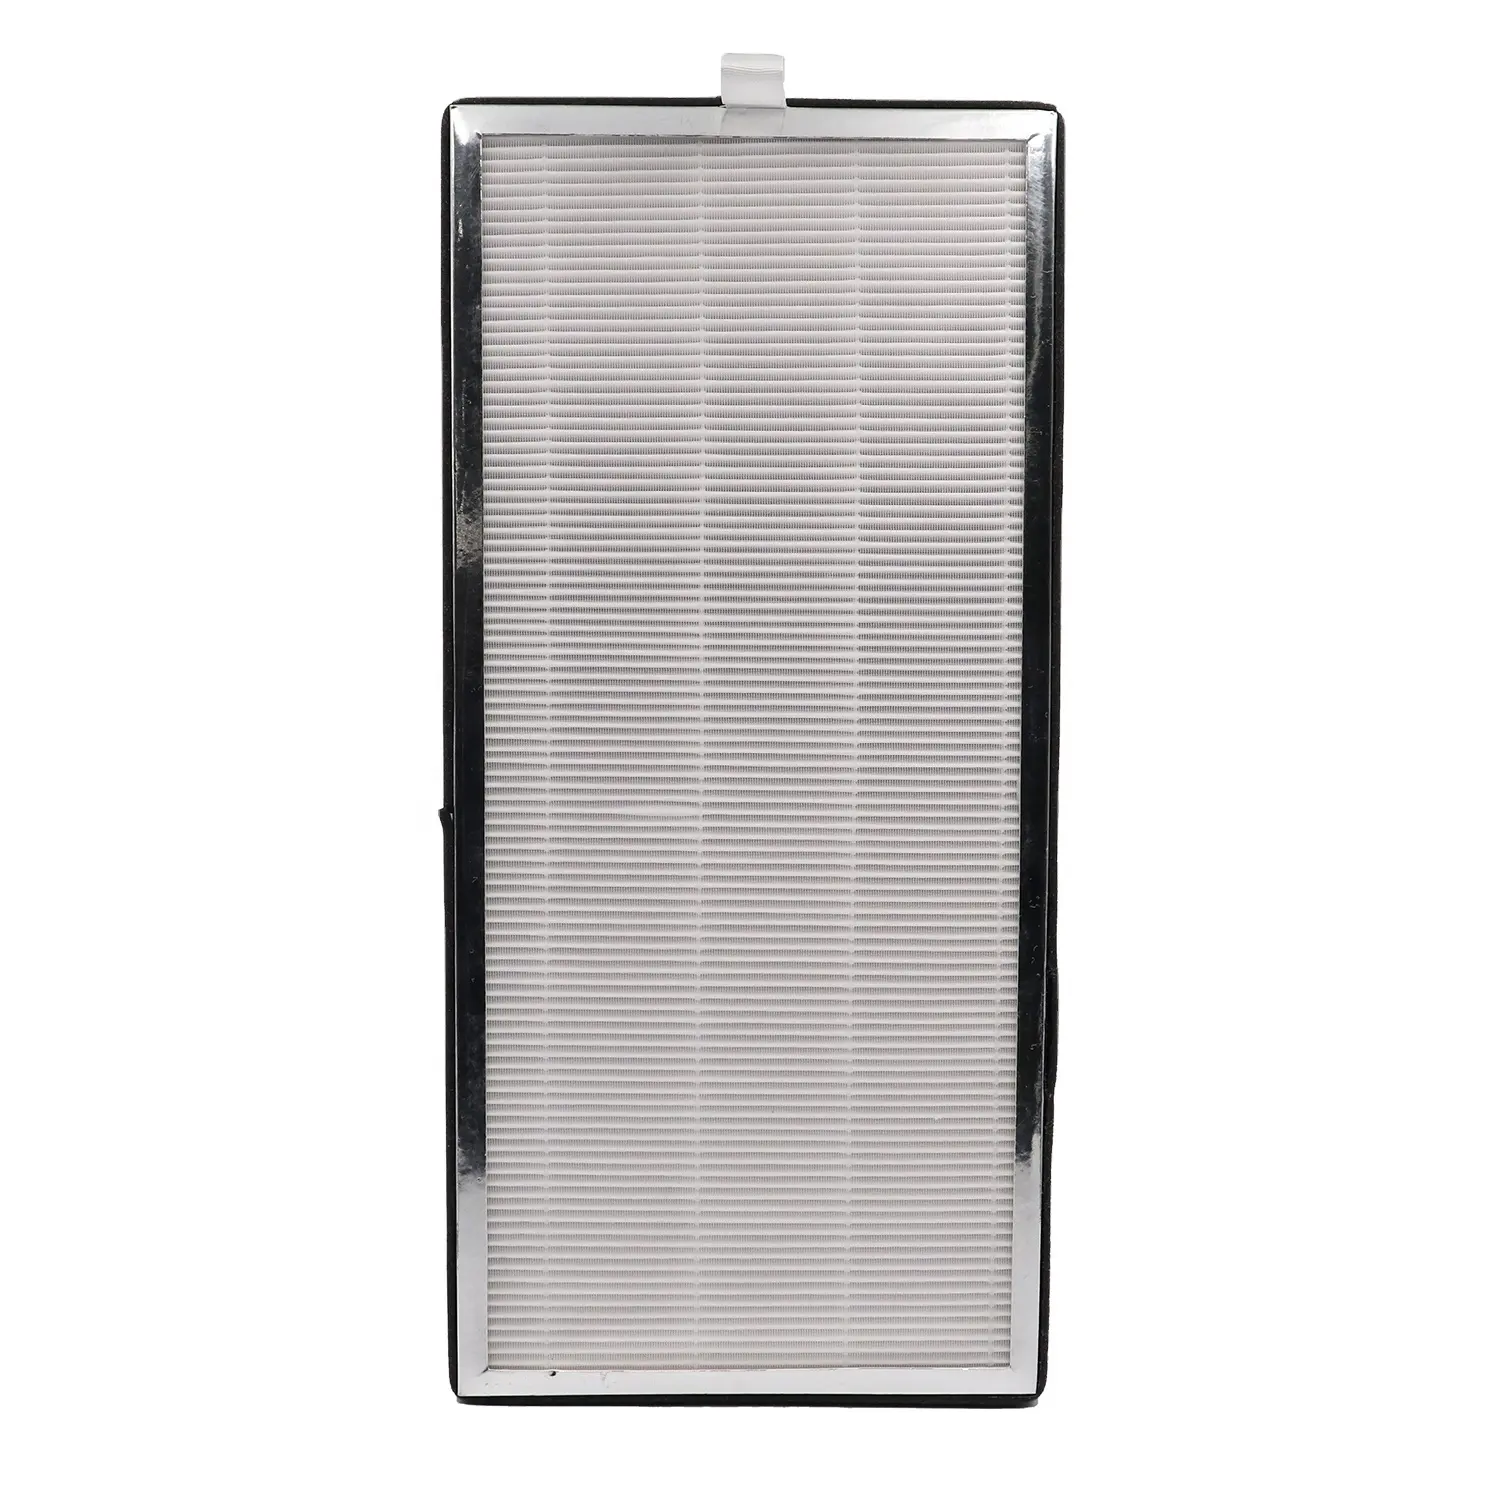 H10 H12 Air purifier hepa filter Replacement for Medify MA-40 Purifiers Super honeycomb carbon plate